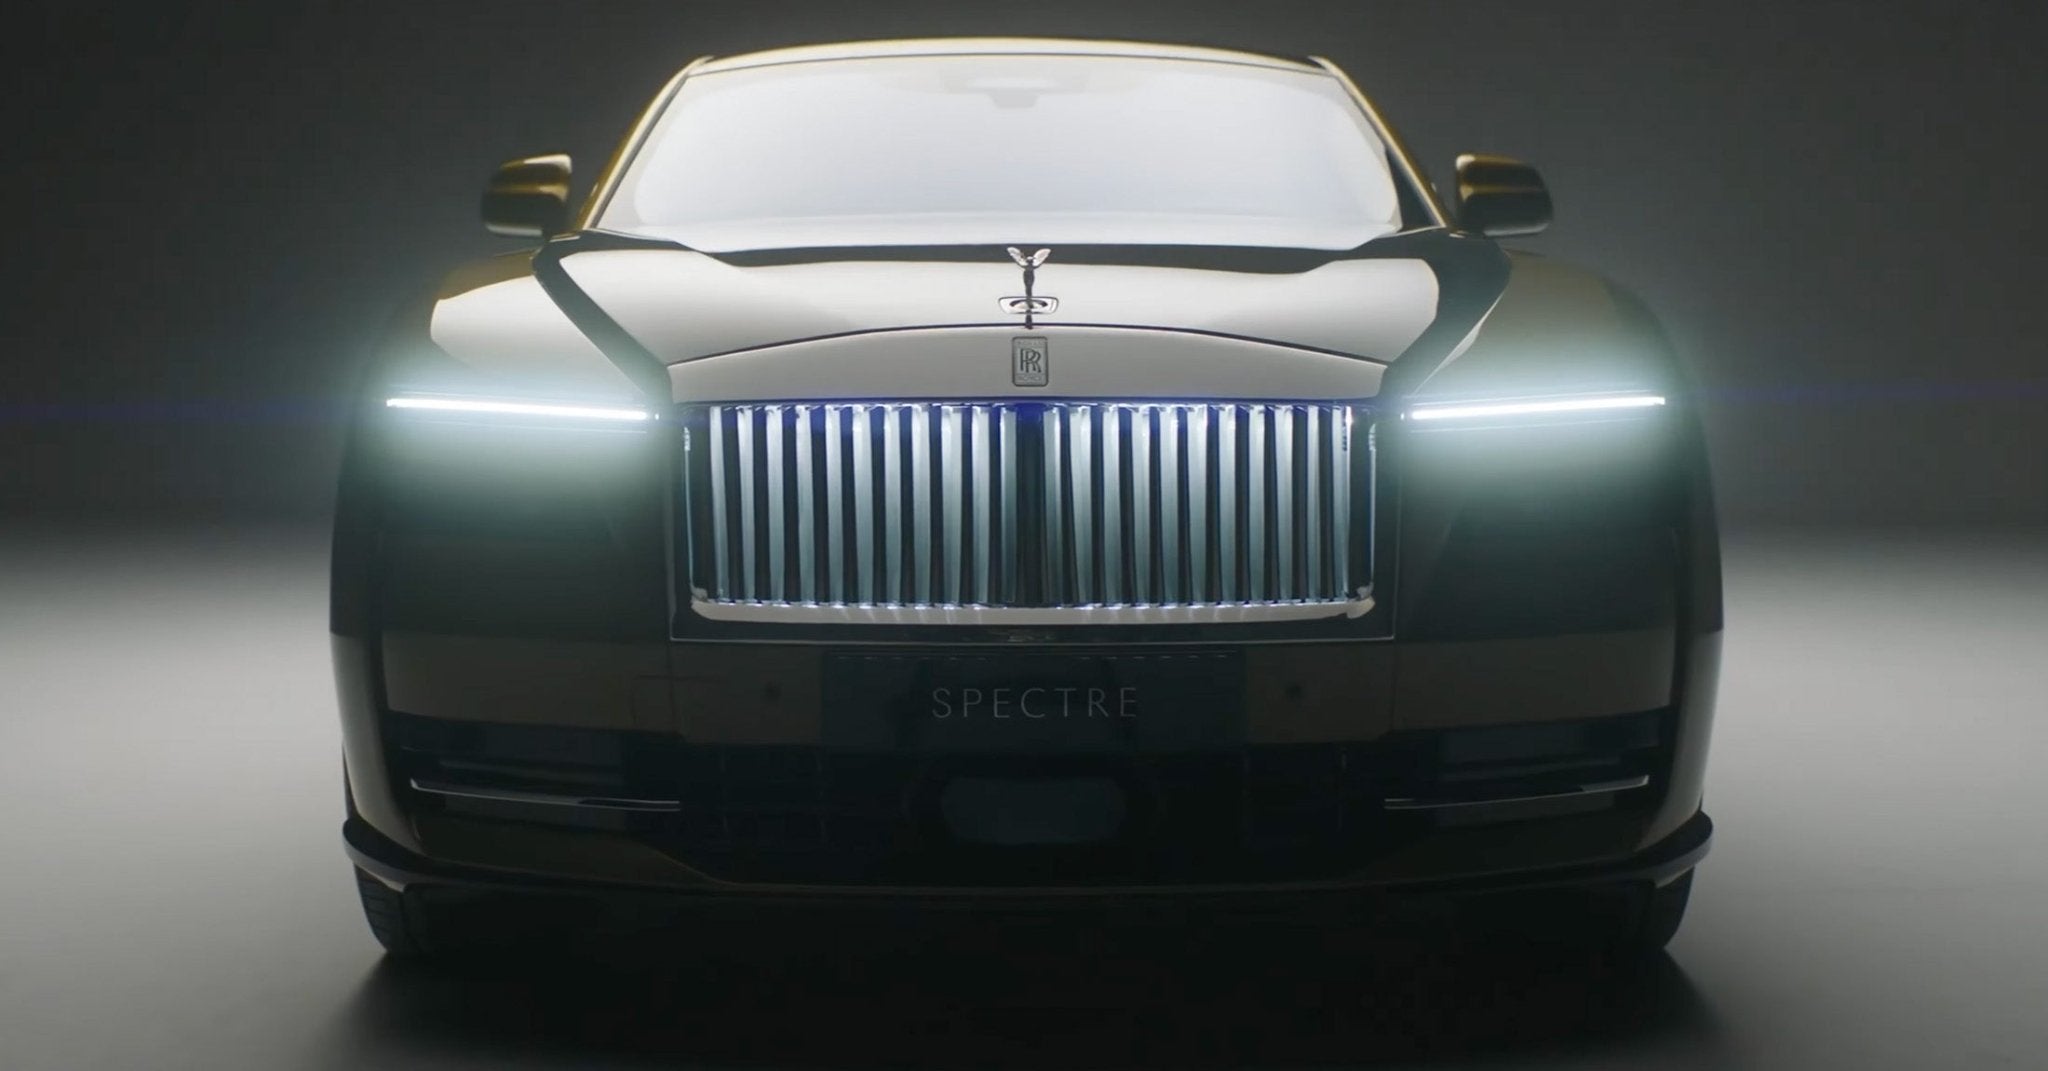 Rolls-Royce Unveiled Its First Fully-Electric Car - Spectre - DSF Antique Jewelry